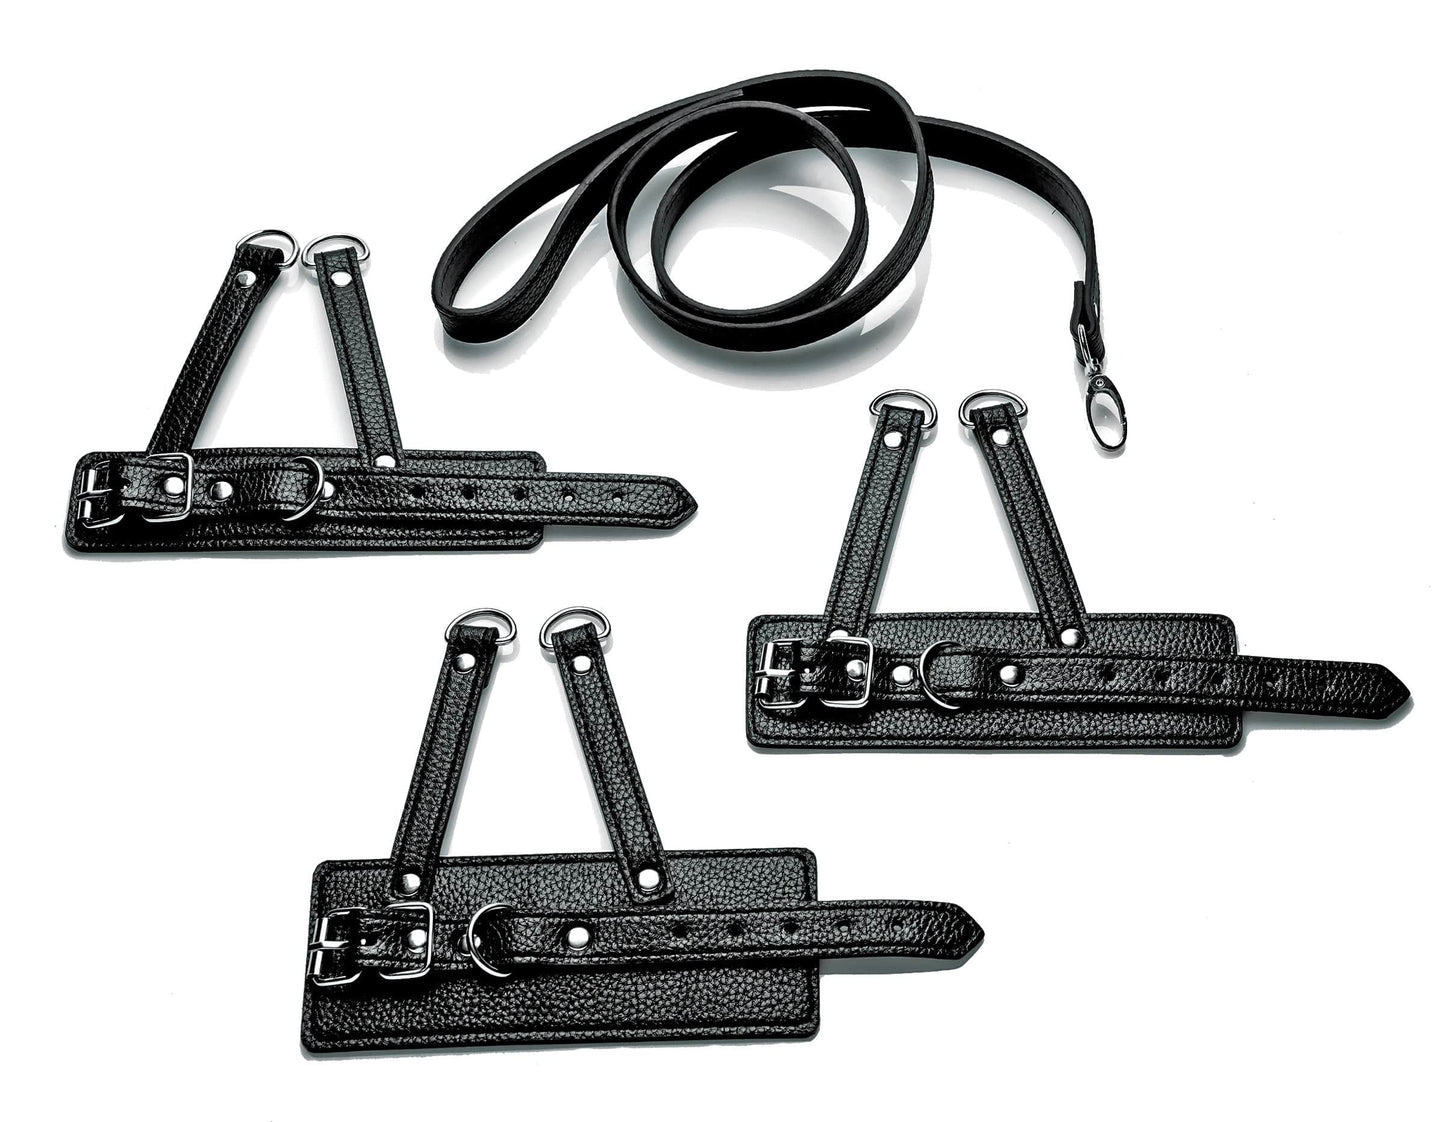 Mistress by Isabella Sinclaire Ball Stretcher Black Mistress by Isabella Sinclaire - 3 Piece Ball Stretcher Training Set at the Haus of Shag